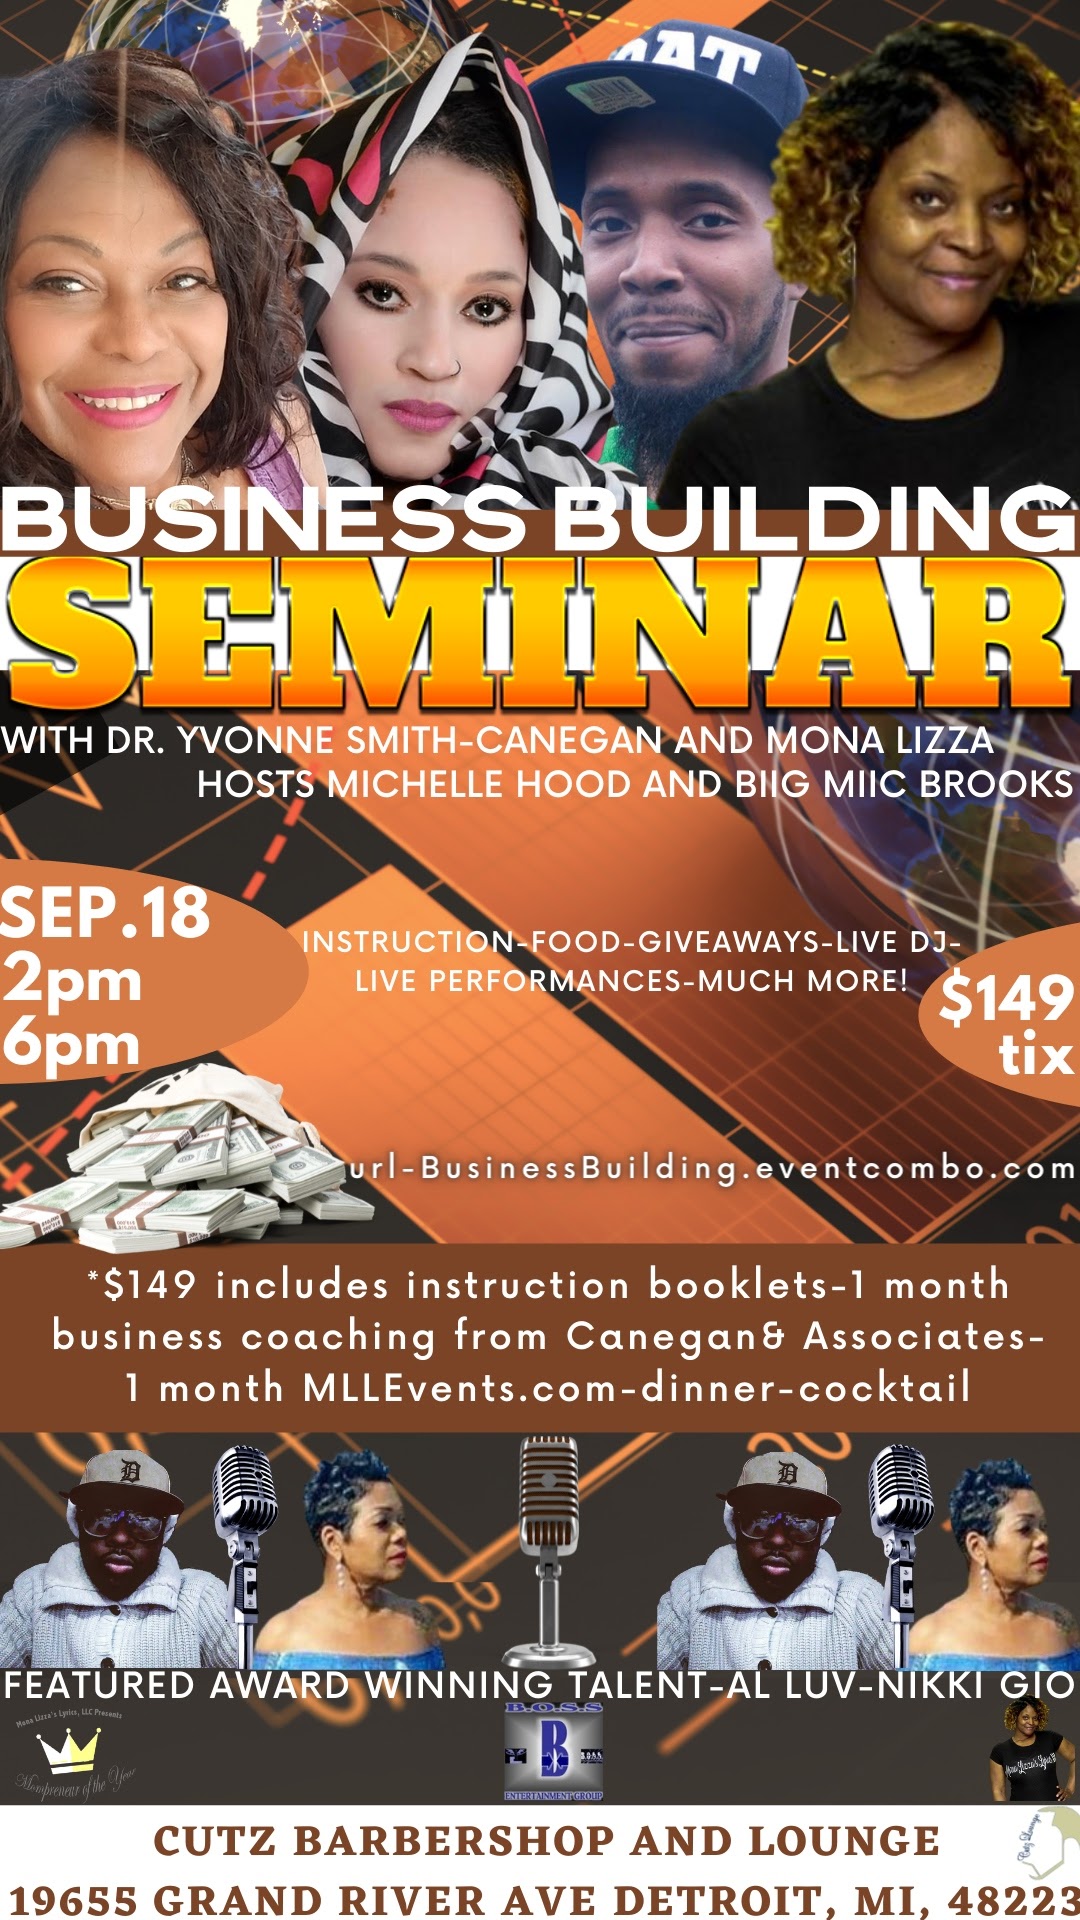 ******CANCELLED******
BUSINESS BUILDING SEMINAR